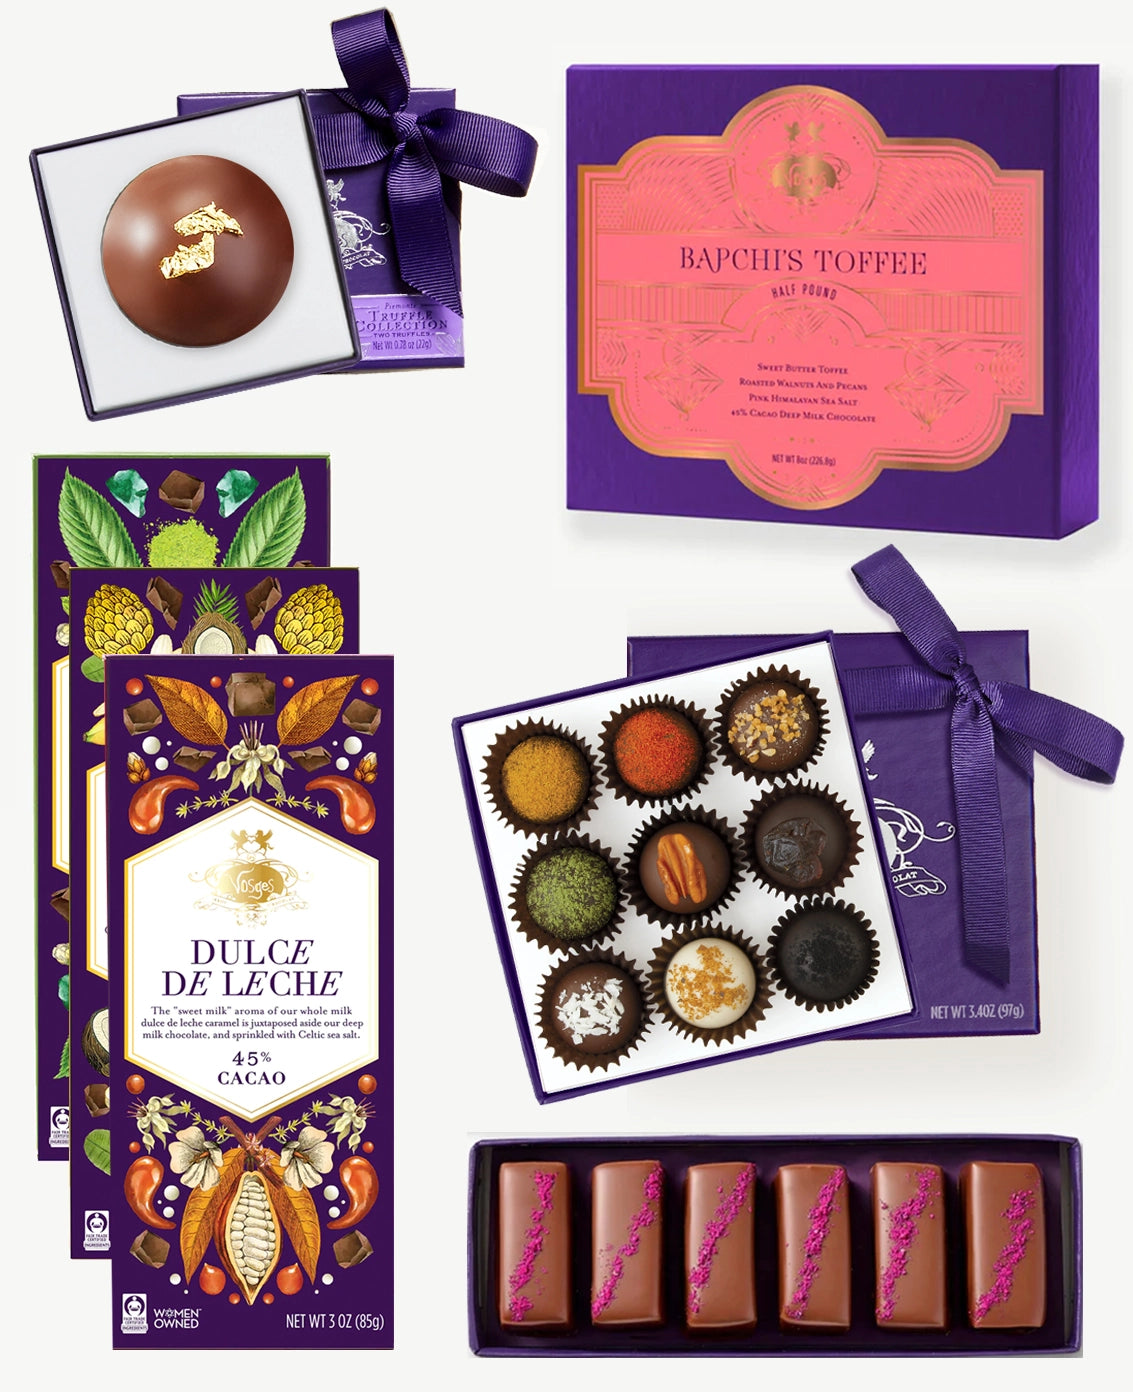 An image collage three Vosges chocolate bars, caramels, exotic truffles, toffee and la bome included in the Best of Vosges Haut-Chocolat bundle.